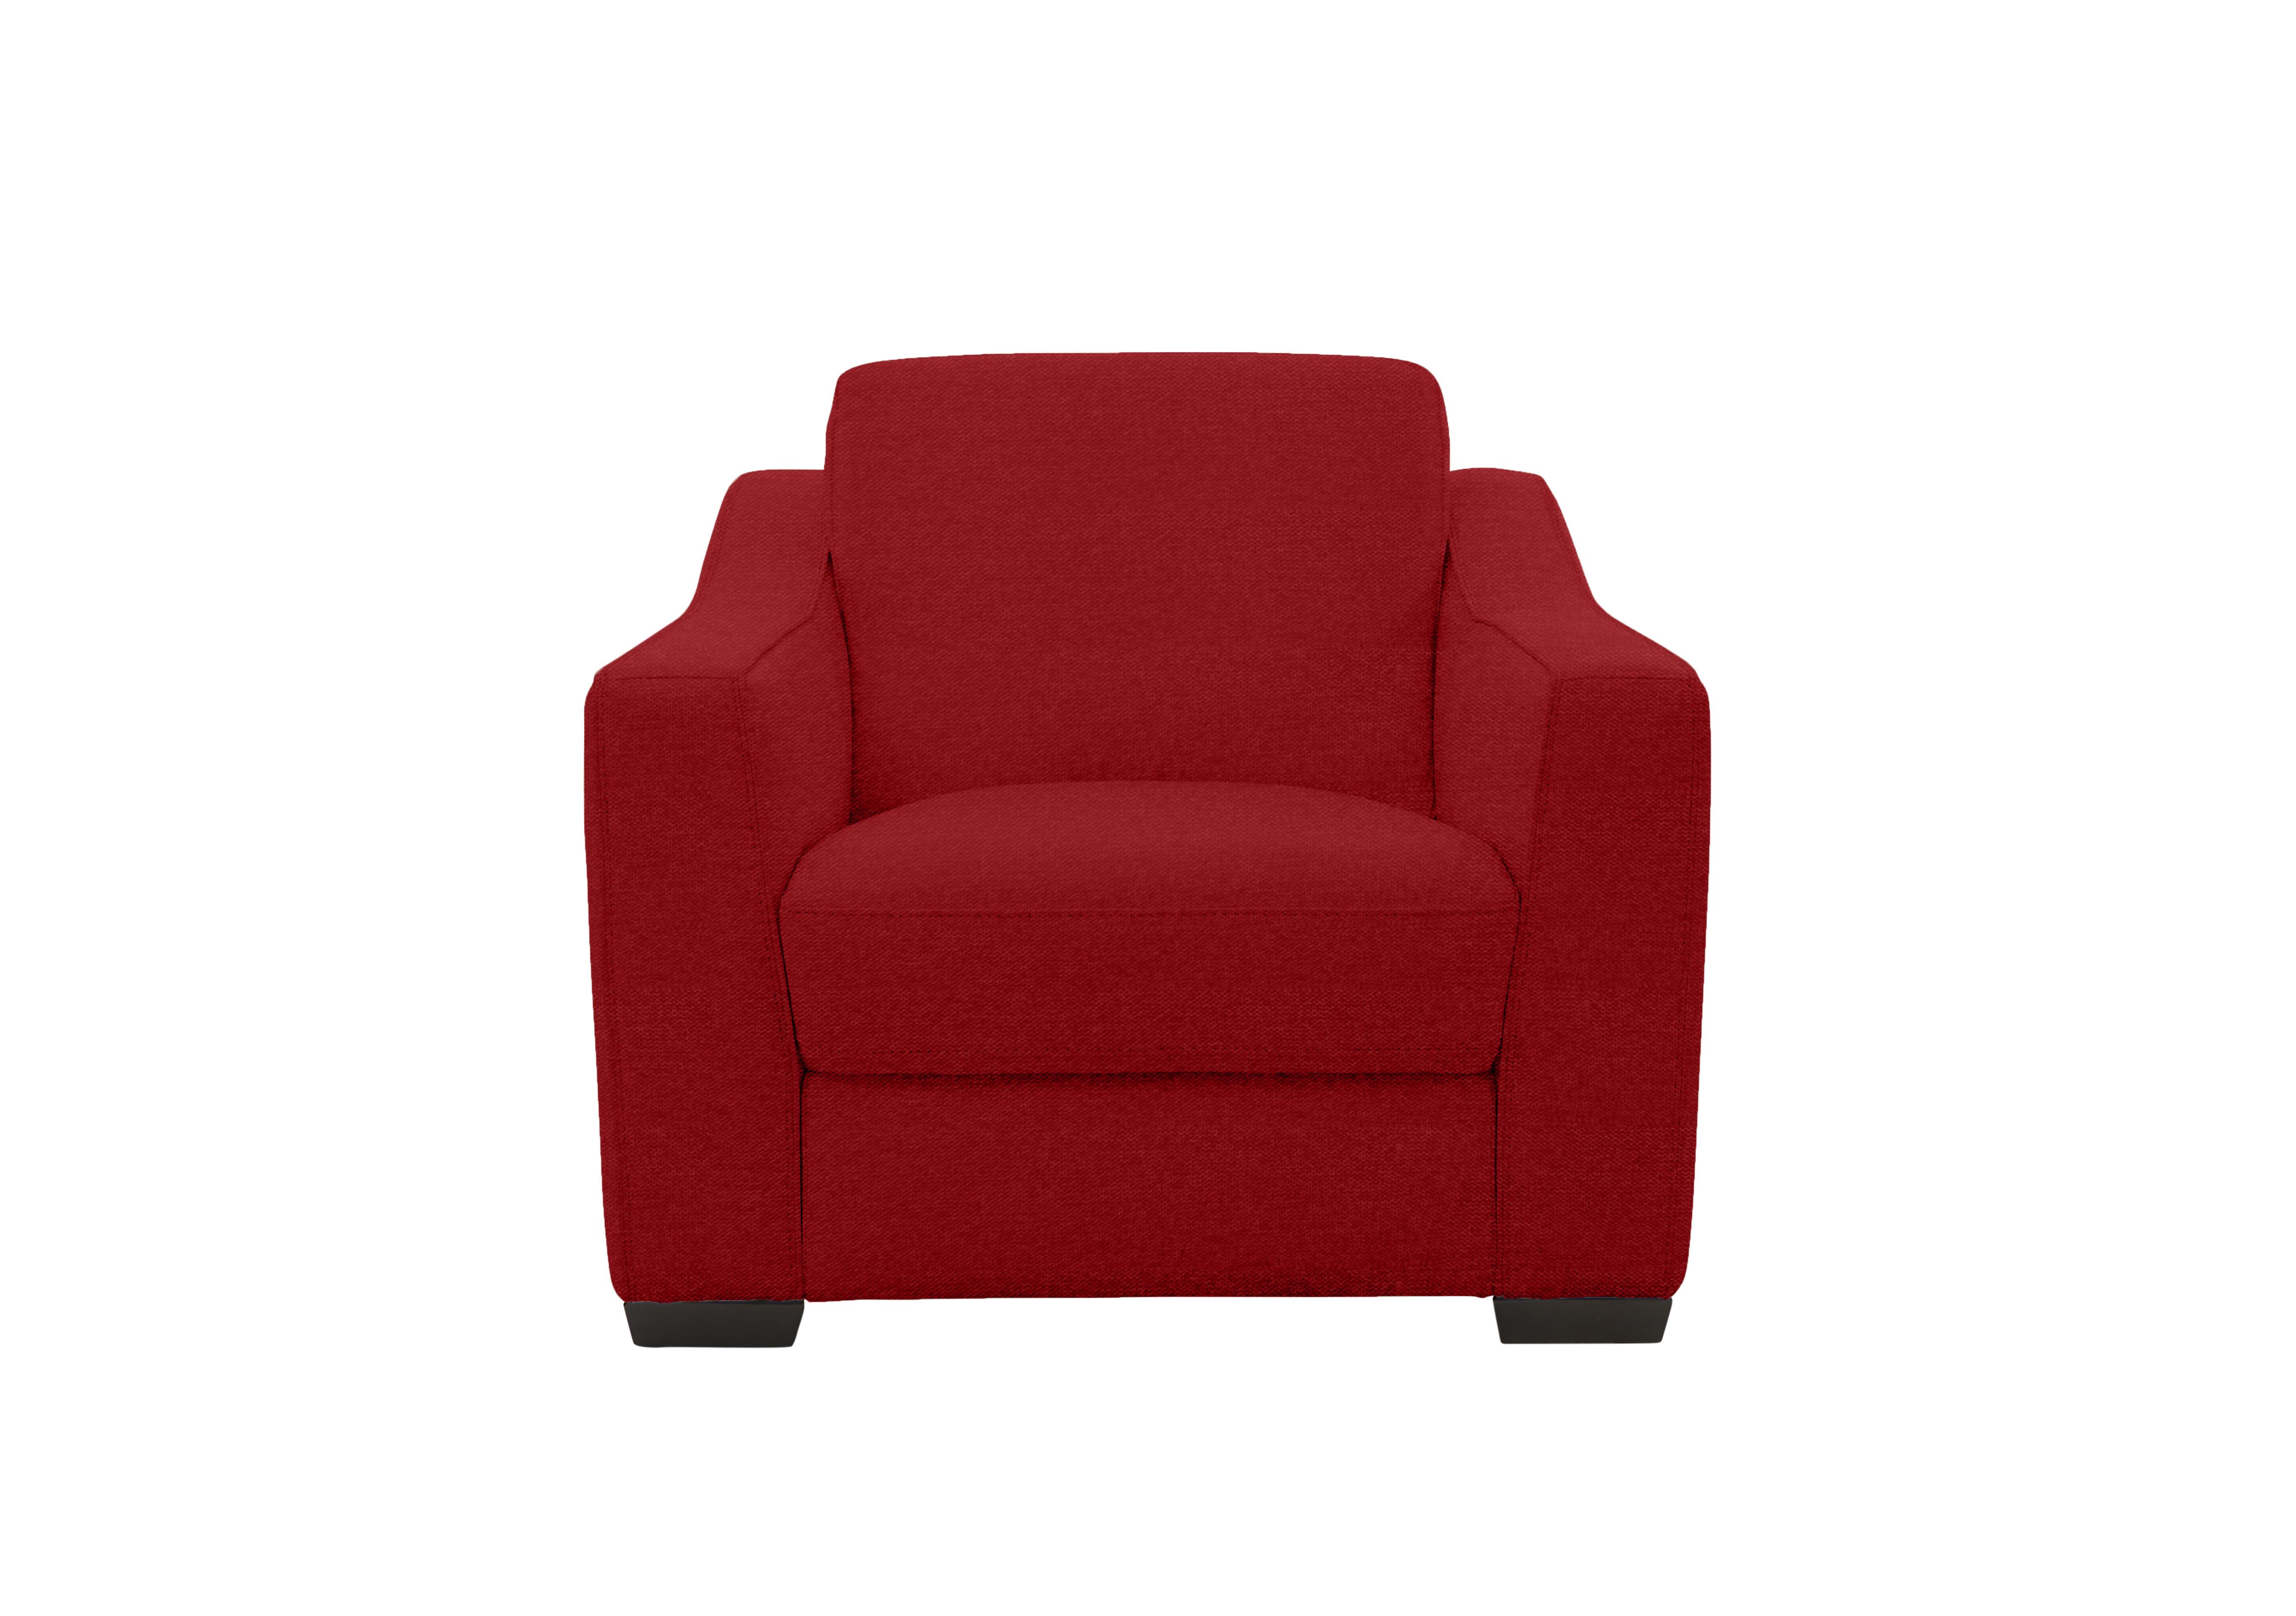 Optimus Fabric Armchair in Fab-Blt-R29 Red on Furniture Village